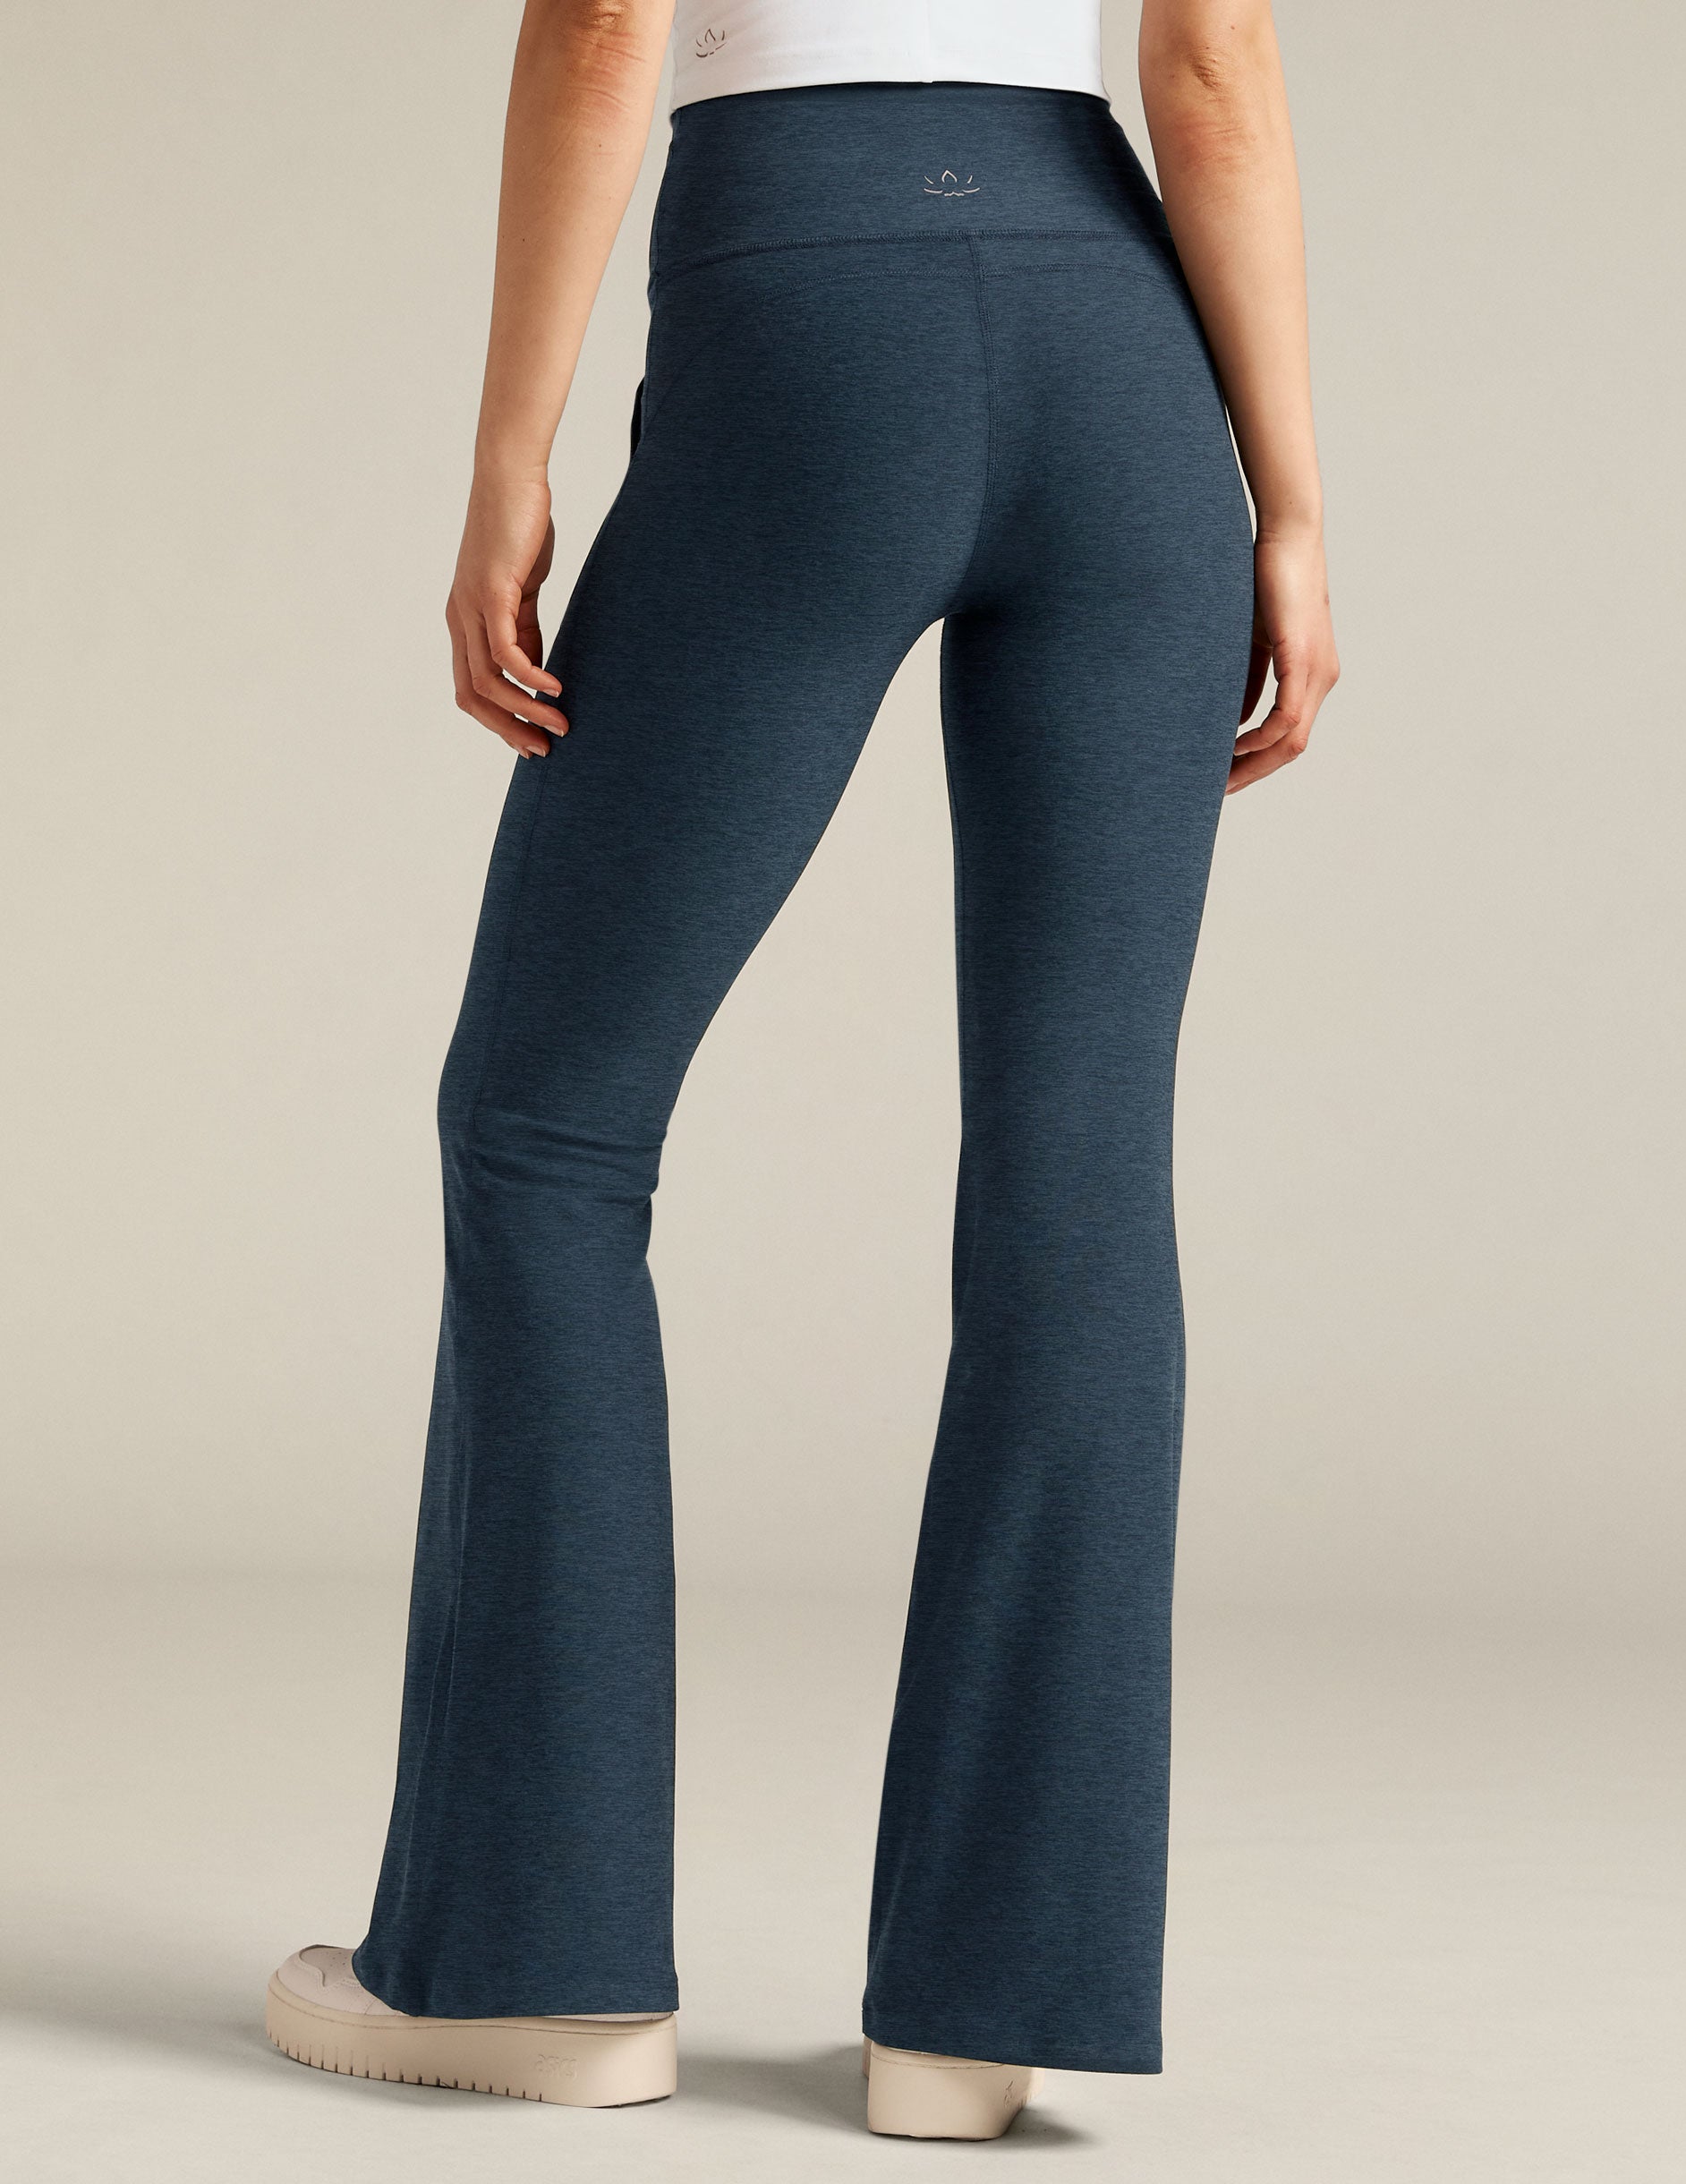 Buy CLOVIA Blue Comfort Fit High-Waist Flared Yoga Pants in Midnight Blue  with Side Pocket